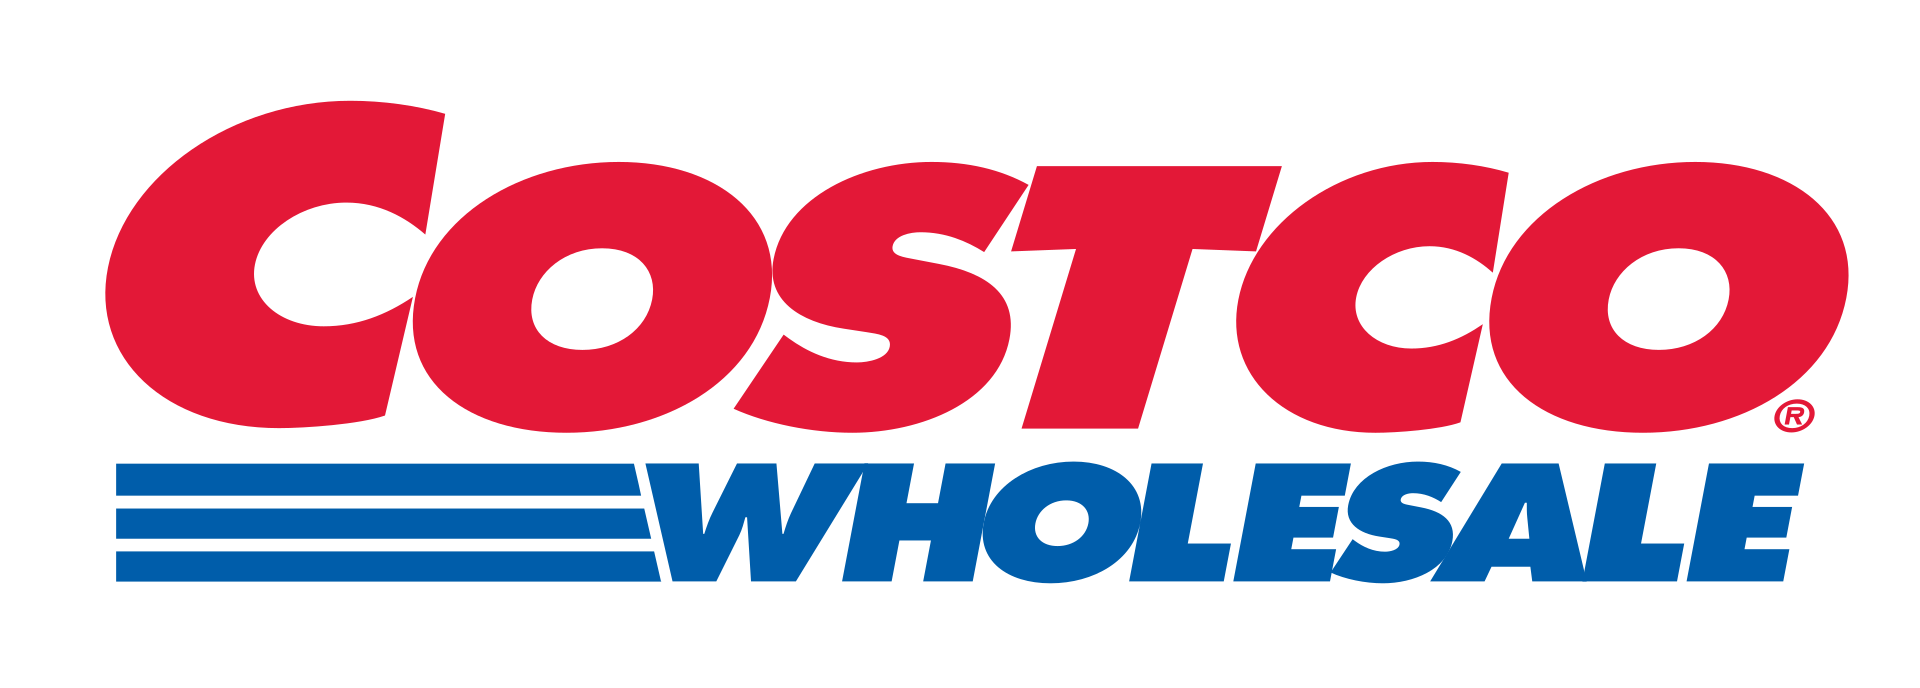 When did Costco 1st use this Logo